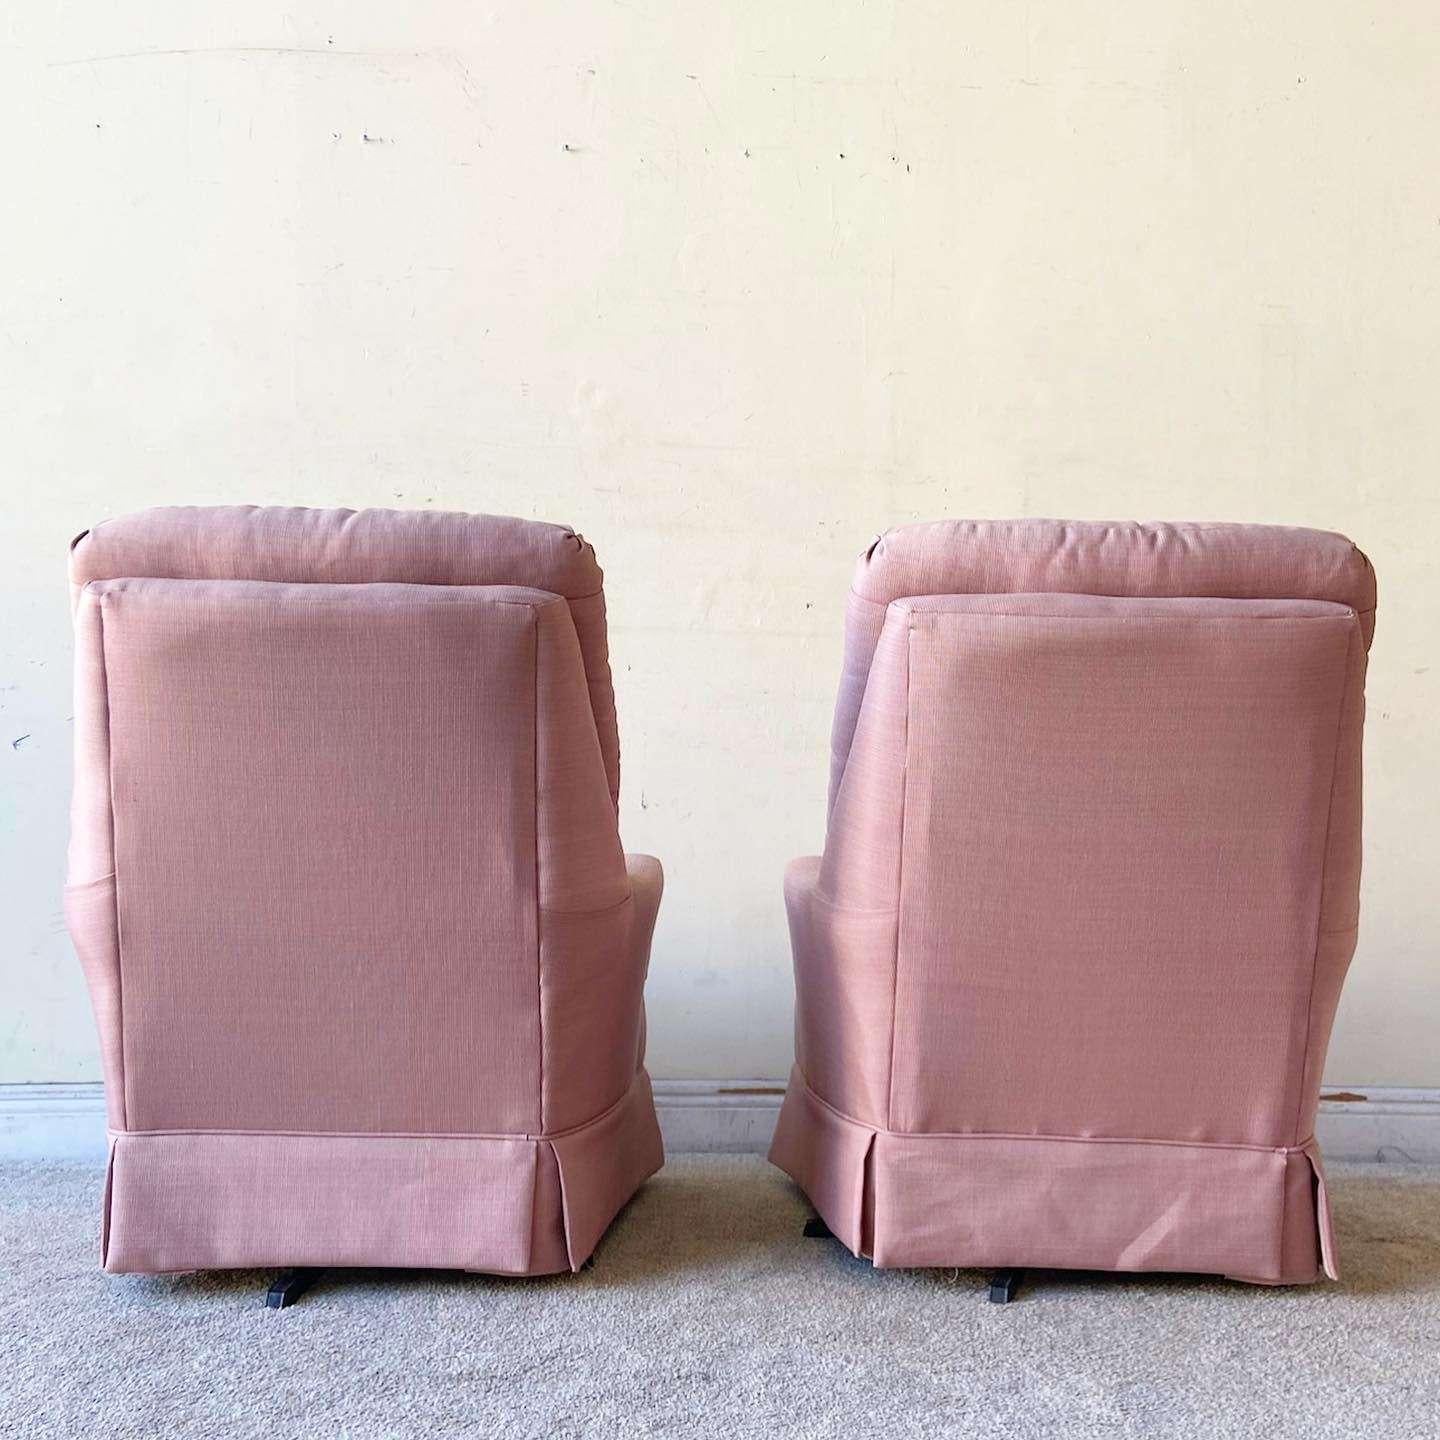 Late 20th Century Mid Century Modern Pink Tufted Swivel Chairs For Sale